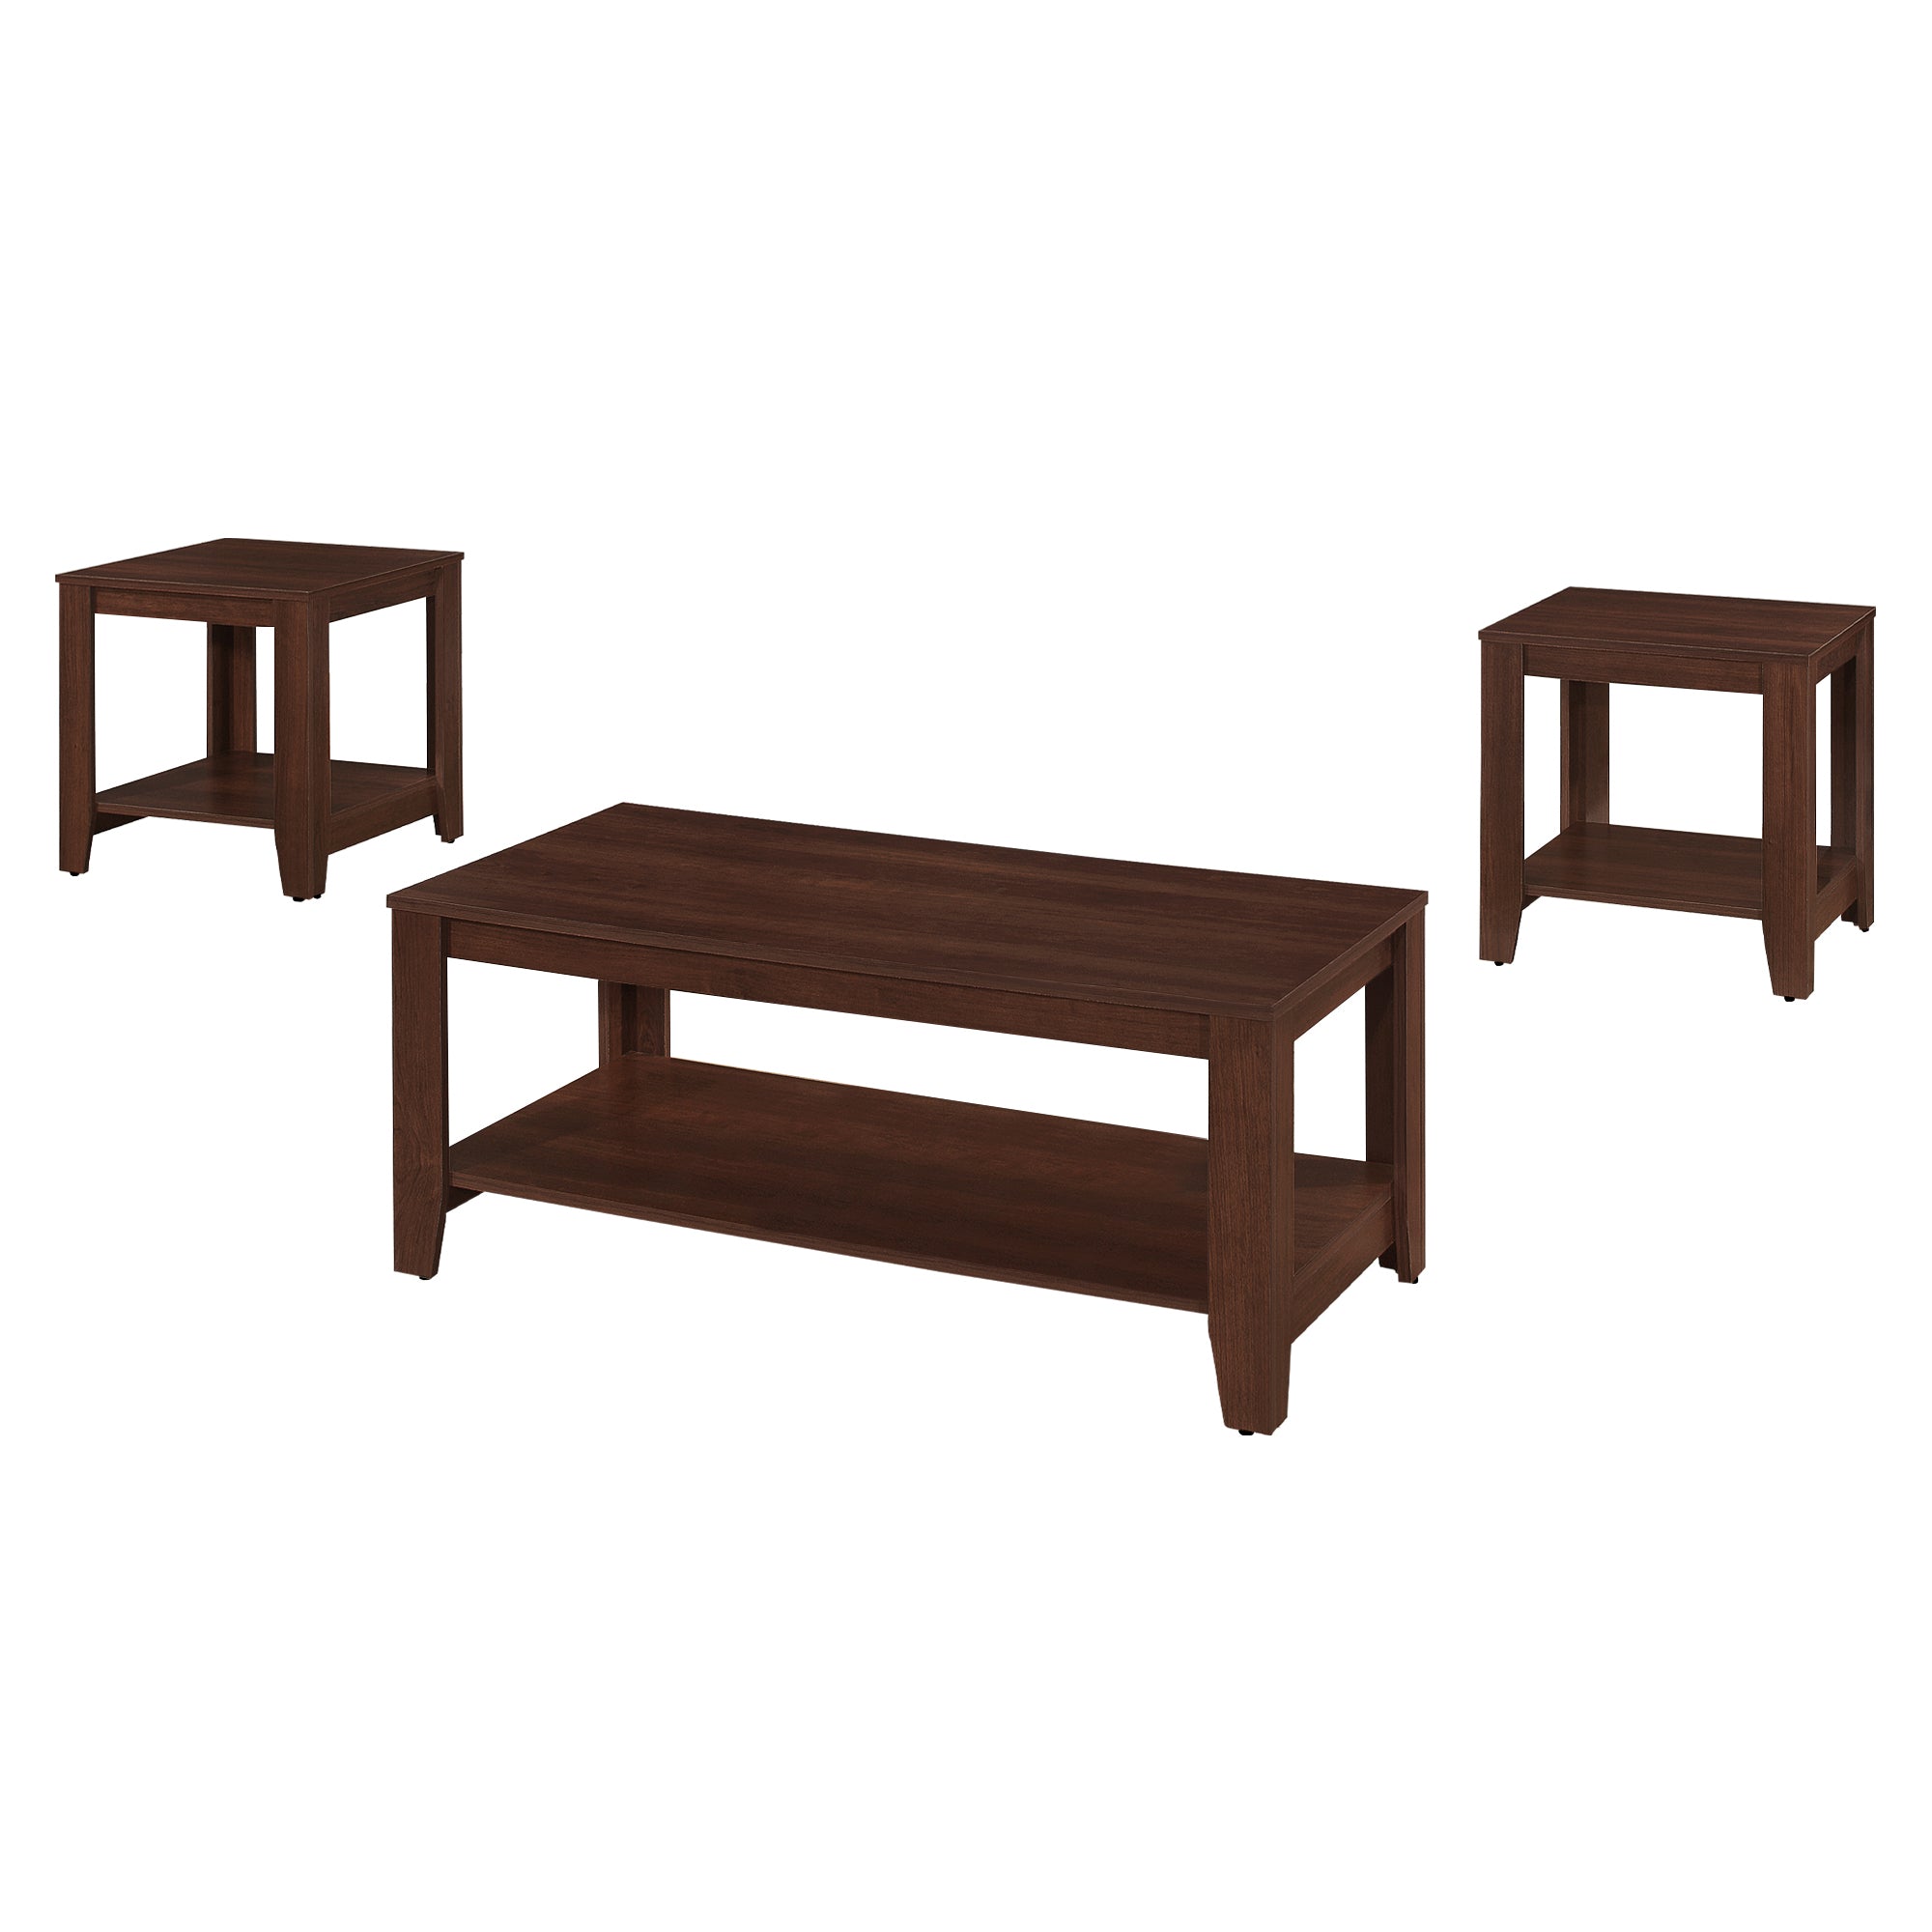 MN-907993P    Table Set, 3Pcs Set, Coffee, End, Side, Accent, Living Room, Laminate, Cherry, Contemporary, Modern